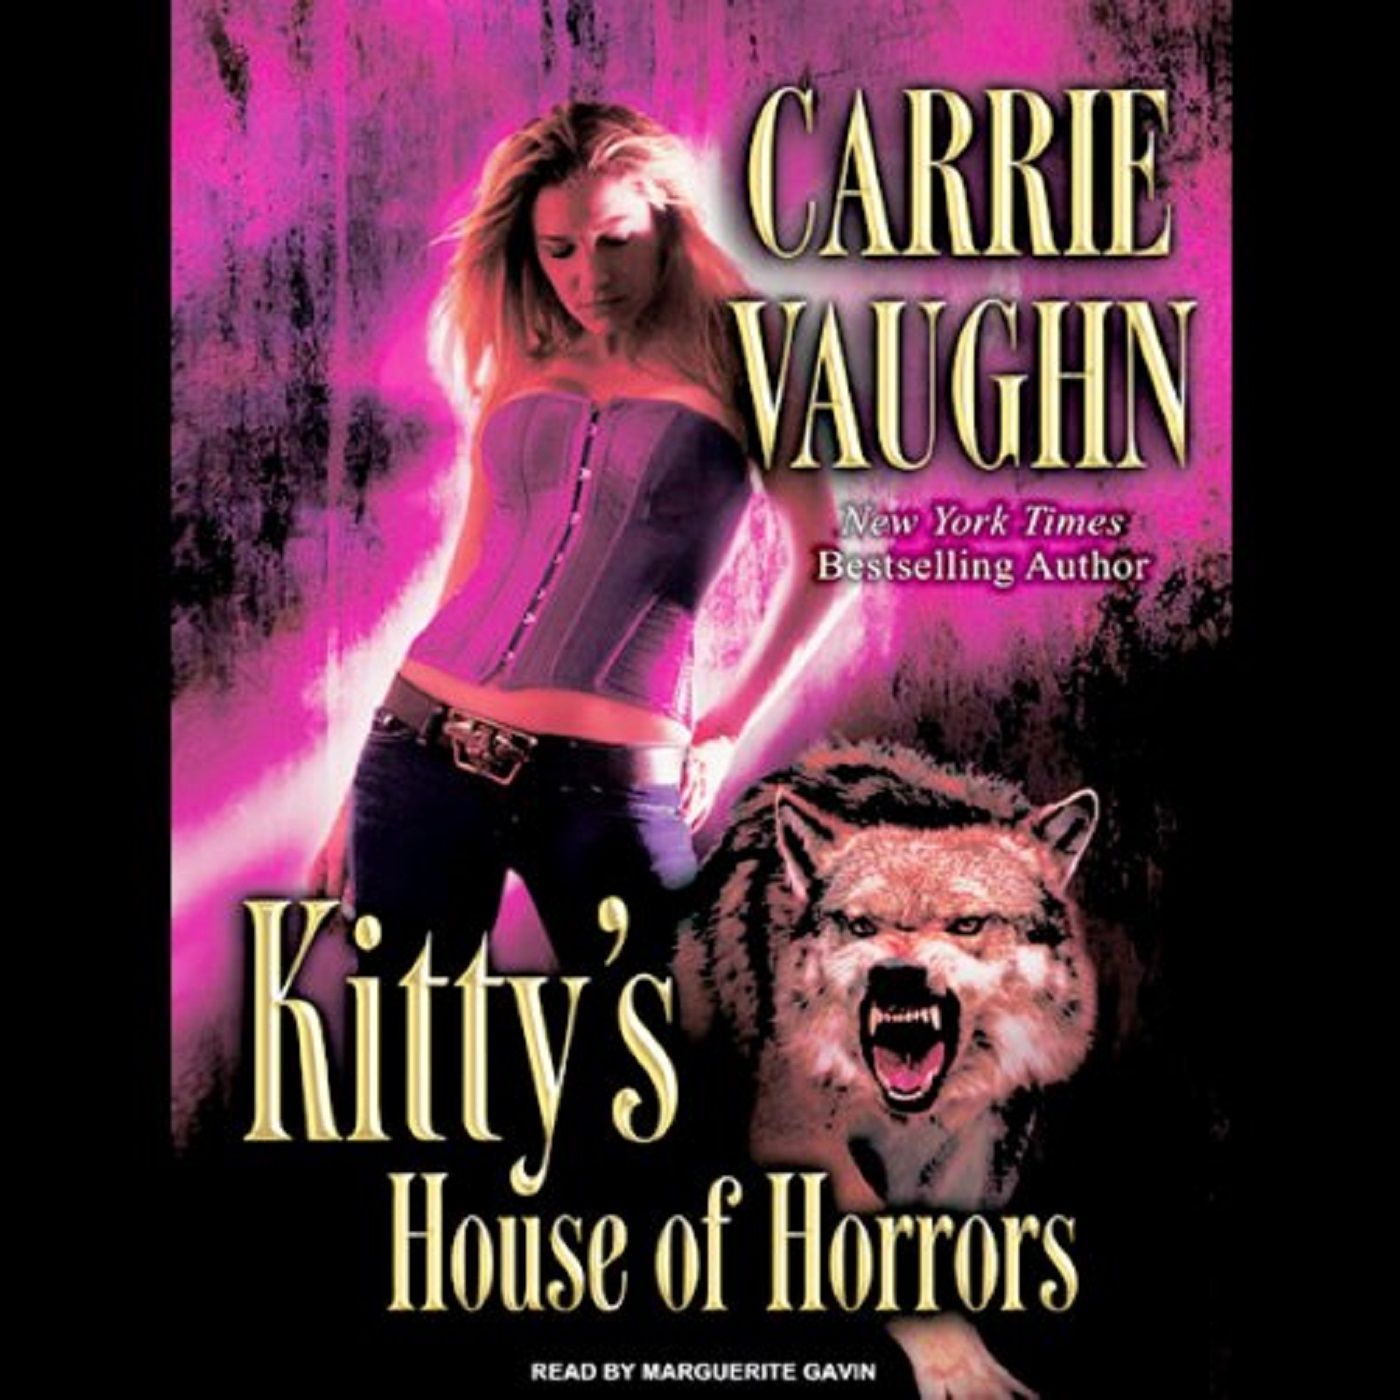 Kitty's House of Horrors by Carrie Vaughn ch2